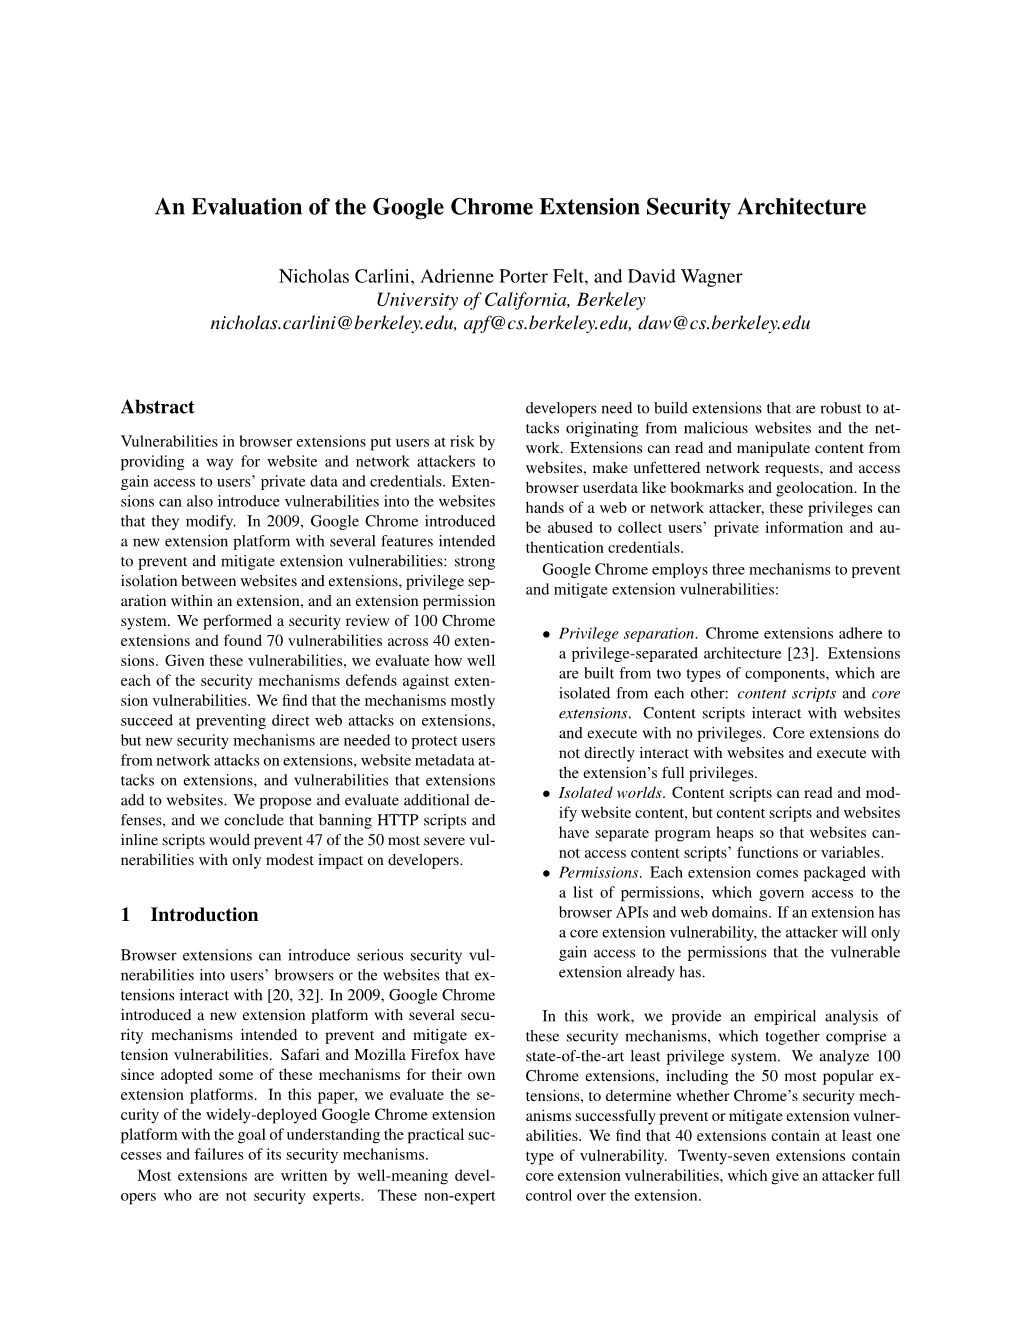 An Evaluation of the Google Chrome Extension Security Architecture